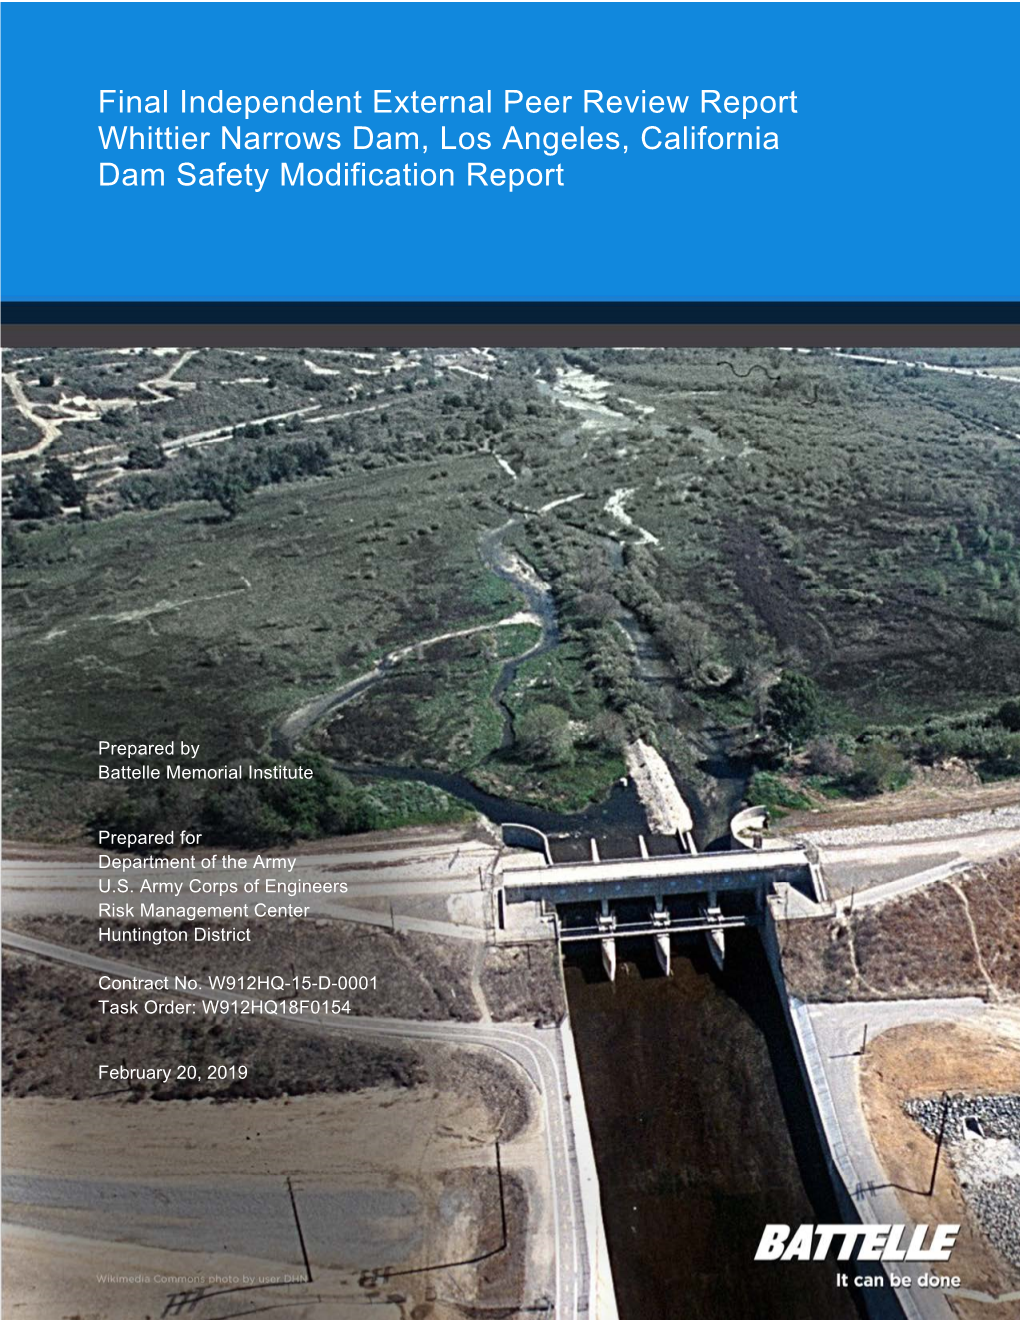 Final Independent External Peer Review Report Whittier Narrows Dam, Los Angeles, California Dam Safety Modification Report